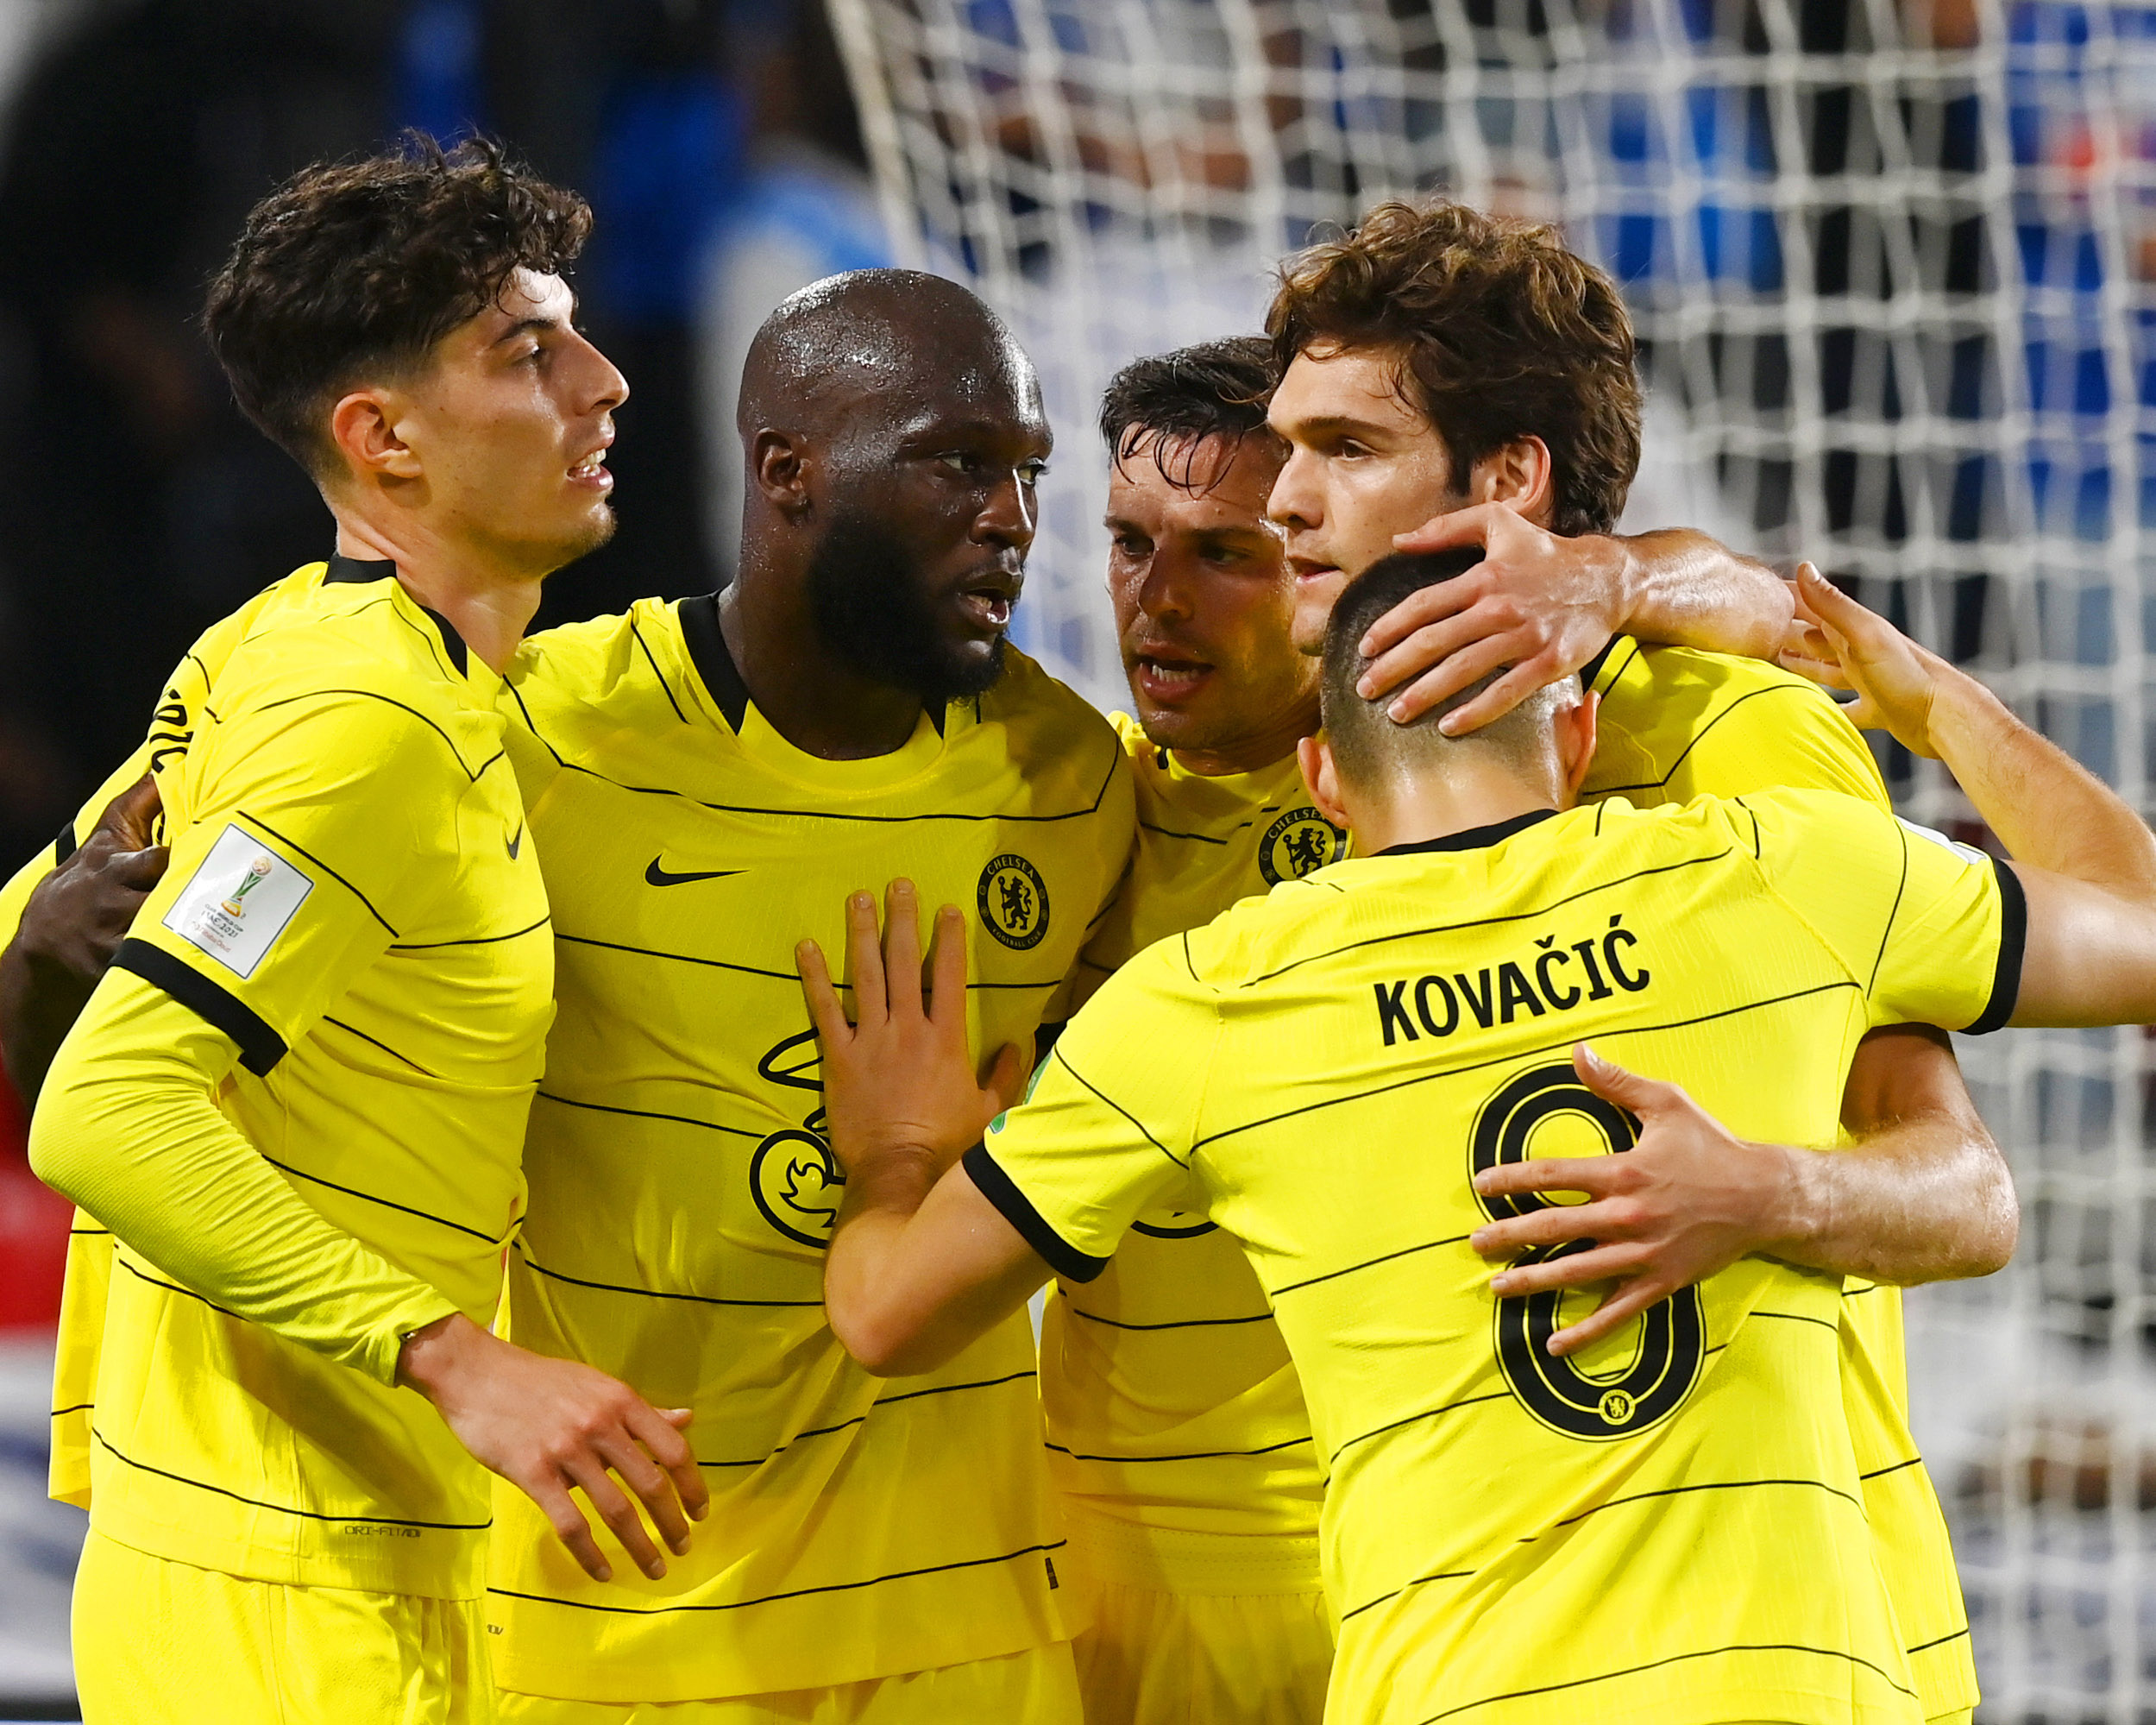 Chelsea beat Al Hilal: Romelu Lukaku's goal sends Chelsea to the FIFA Club World Cup Final after beating Al Hilal - Chelsea will face Palmeiras in the FINAL